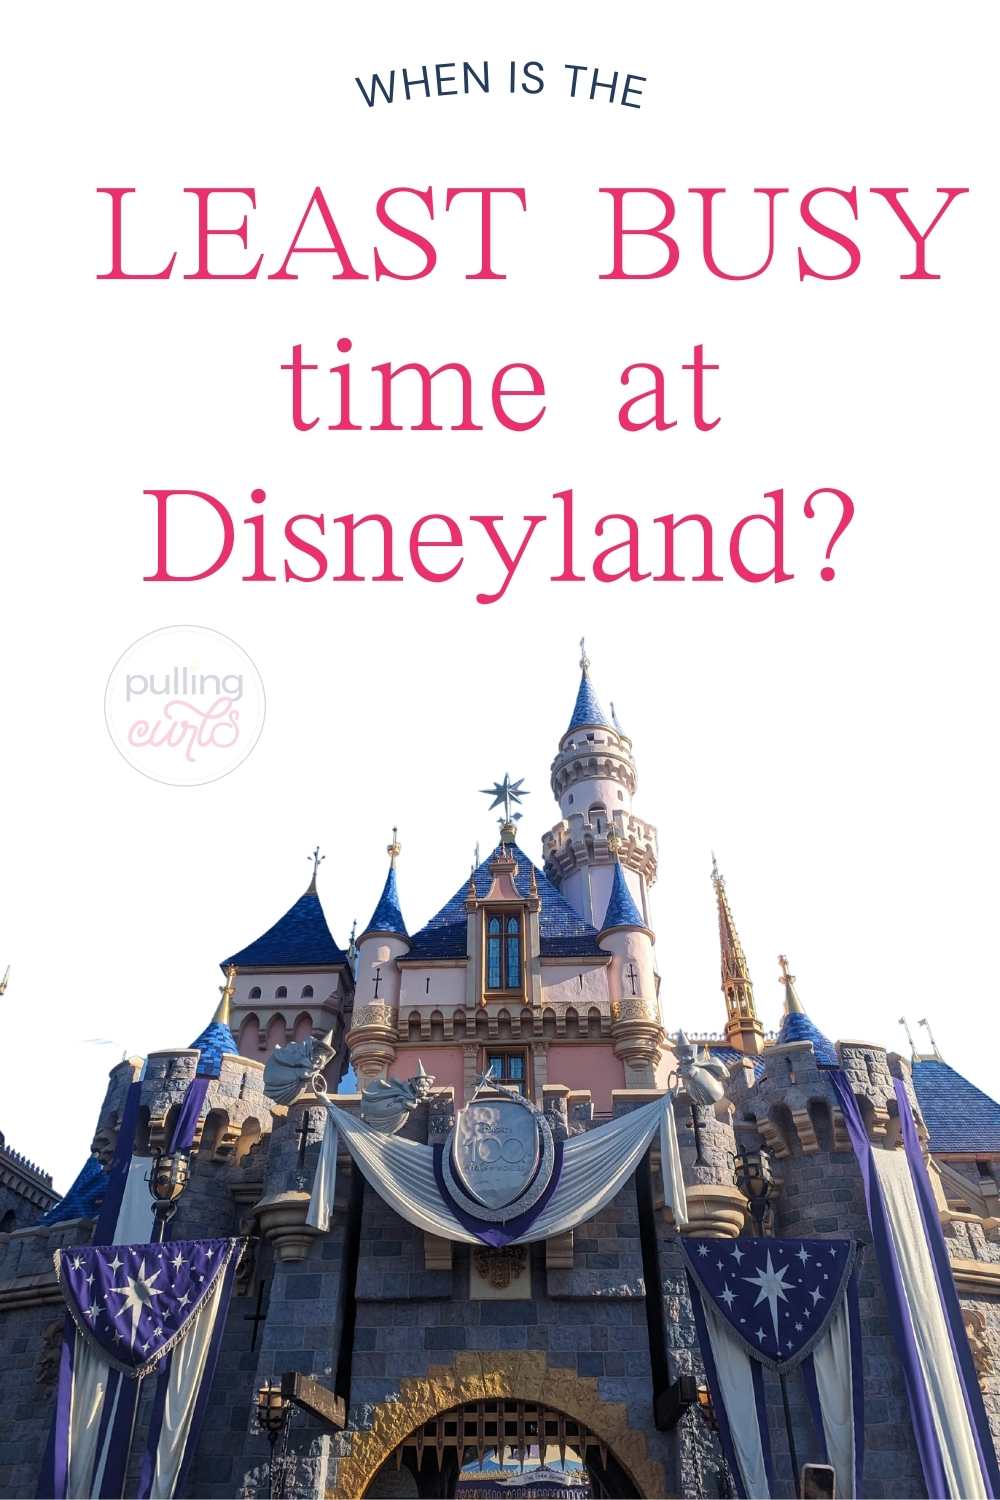 Explore our comprehensive guide to navigating Disneyland at its least crowded! Learn the best times to visit, insider tips on avoiding lines, and more. Turn your magical Disneyland trip into a peaceful, crowd-free experience never to be forgotten. Your dream vacation awaits! via @pullingcurls